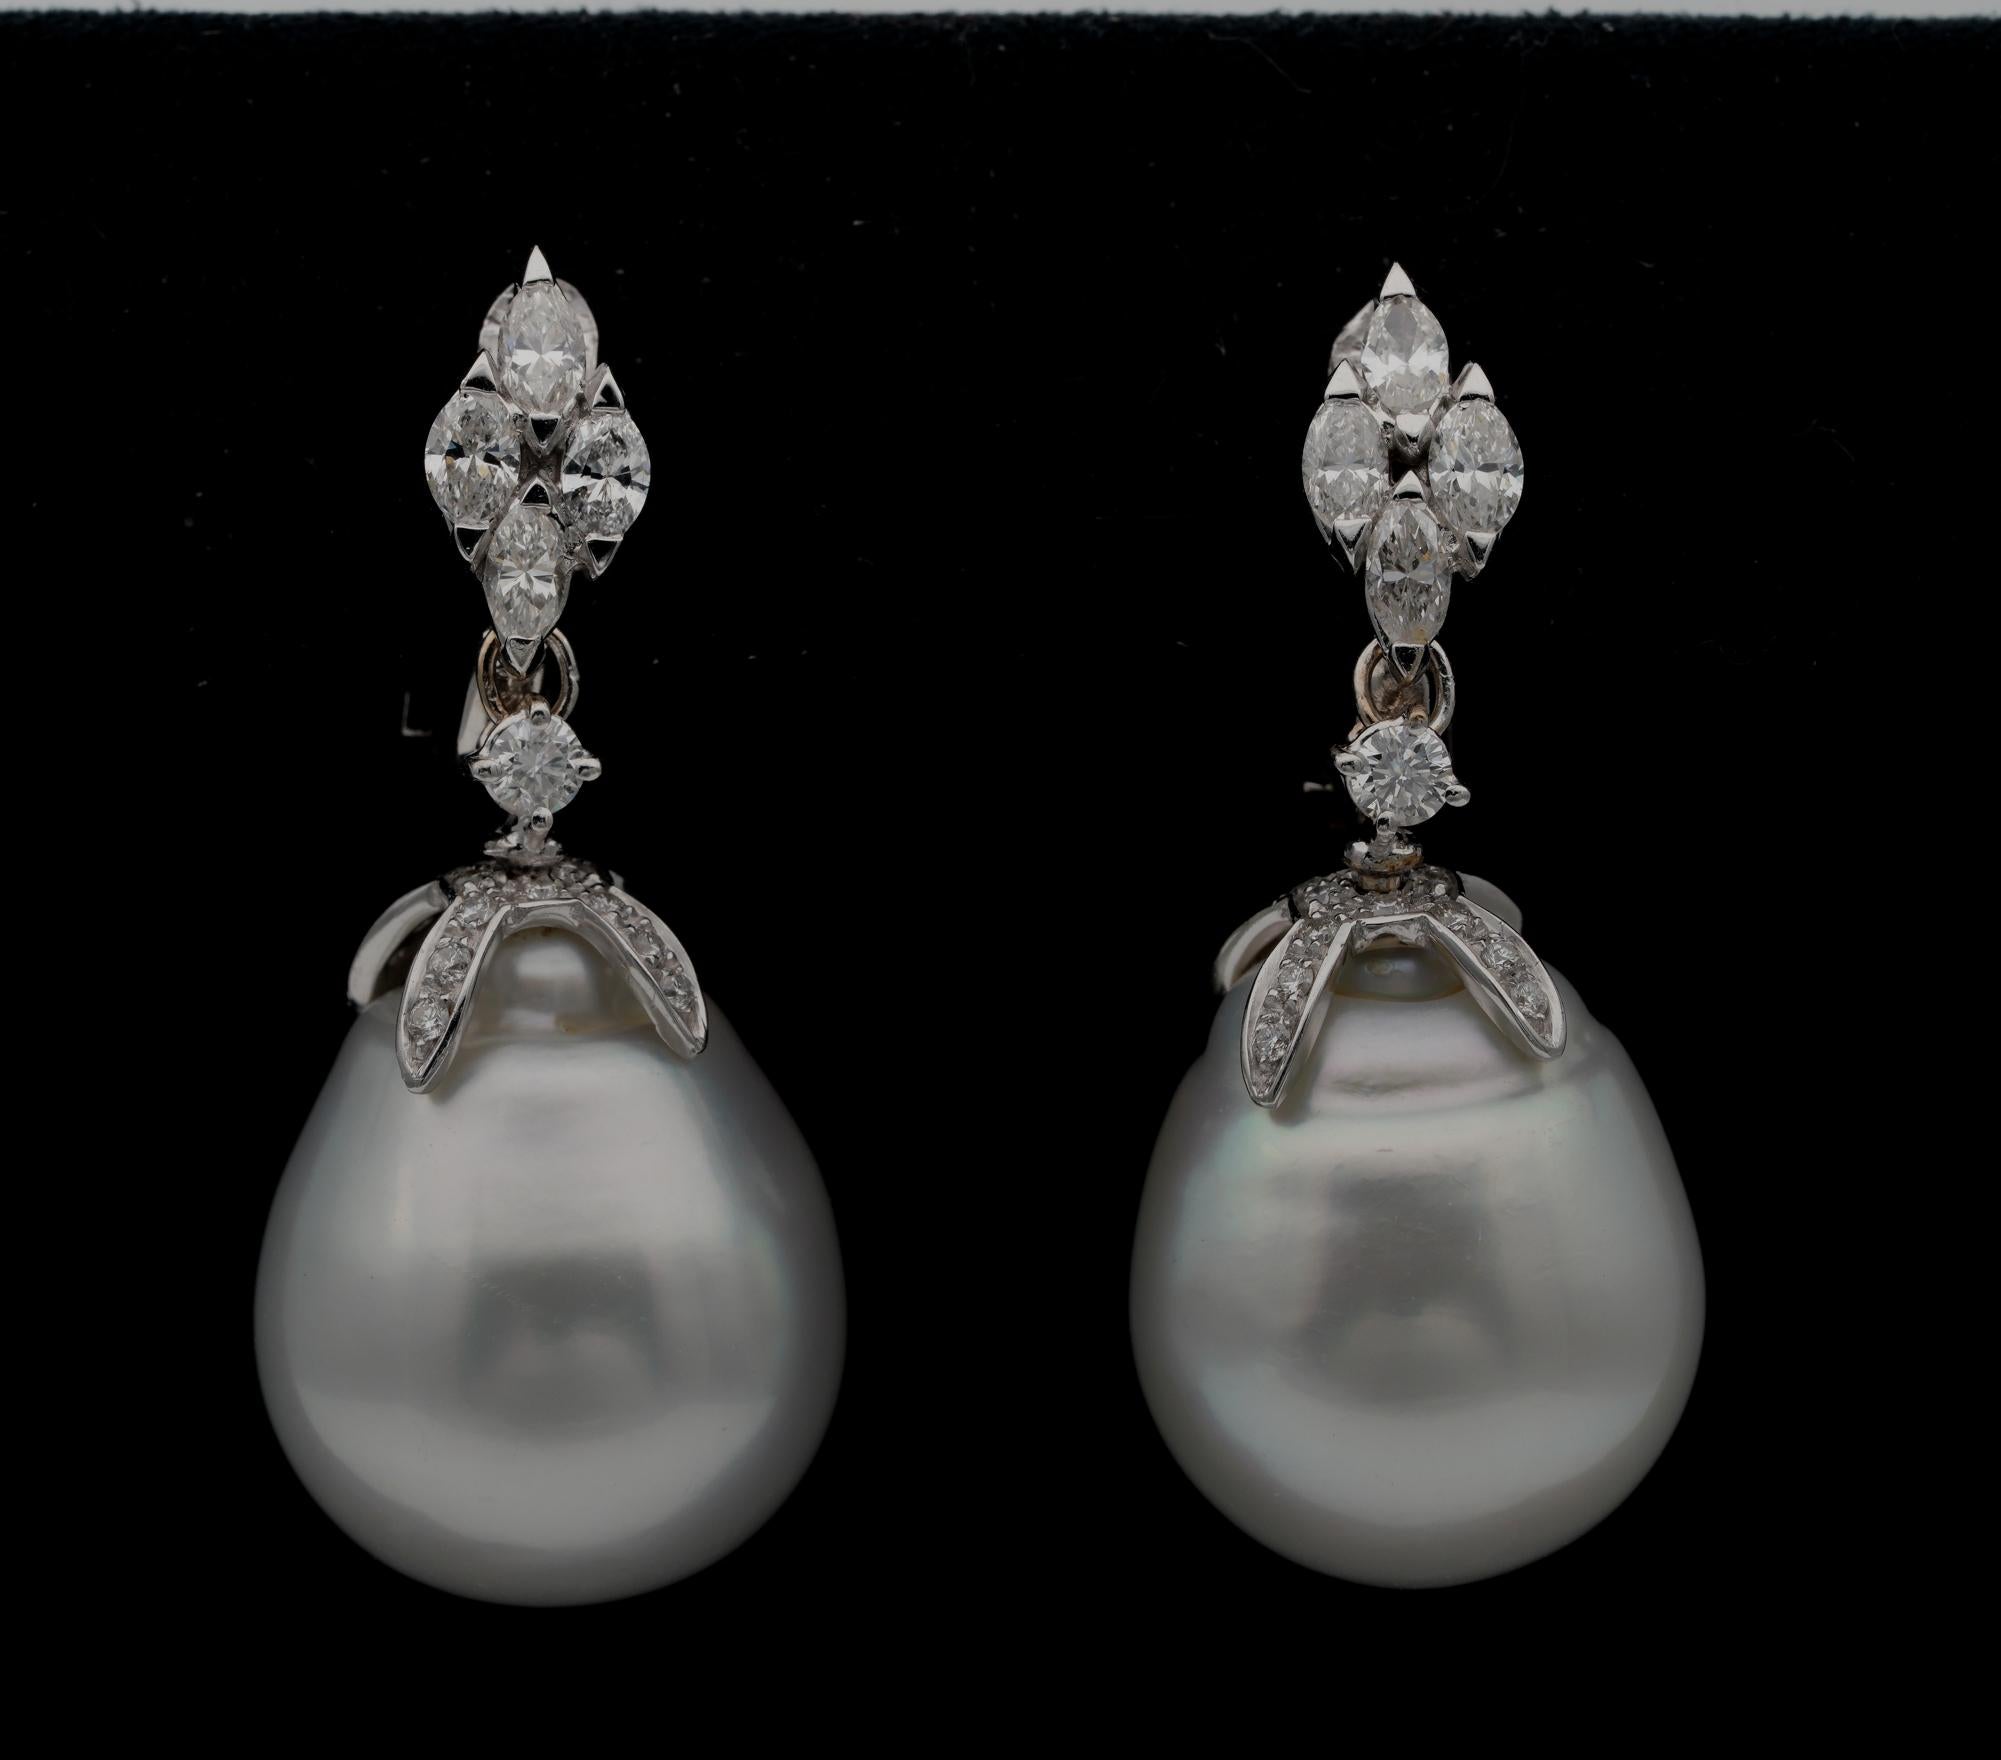 Made to Impress

Marvellous pair of vintage earrings, beautifully made with large gigantic pair of South Sea Pearls - tastefully designed with Diamonds creating an unique style simple but very effective on ears
Hand crafted of solid 18 KT white